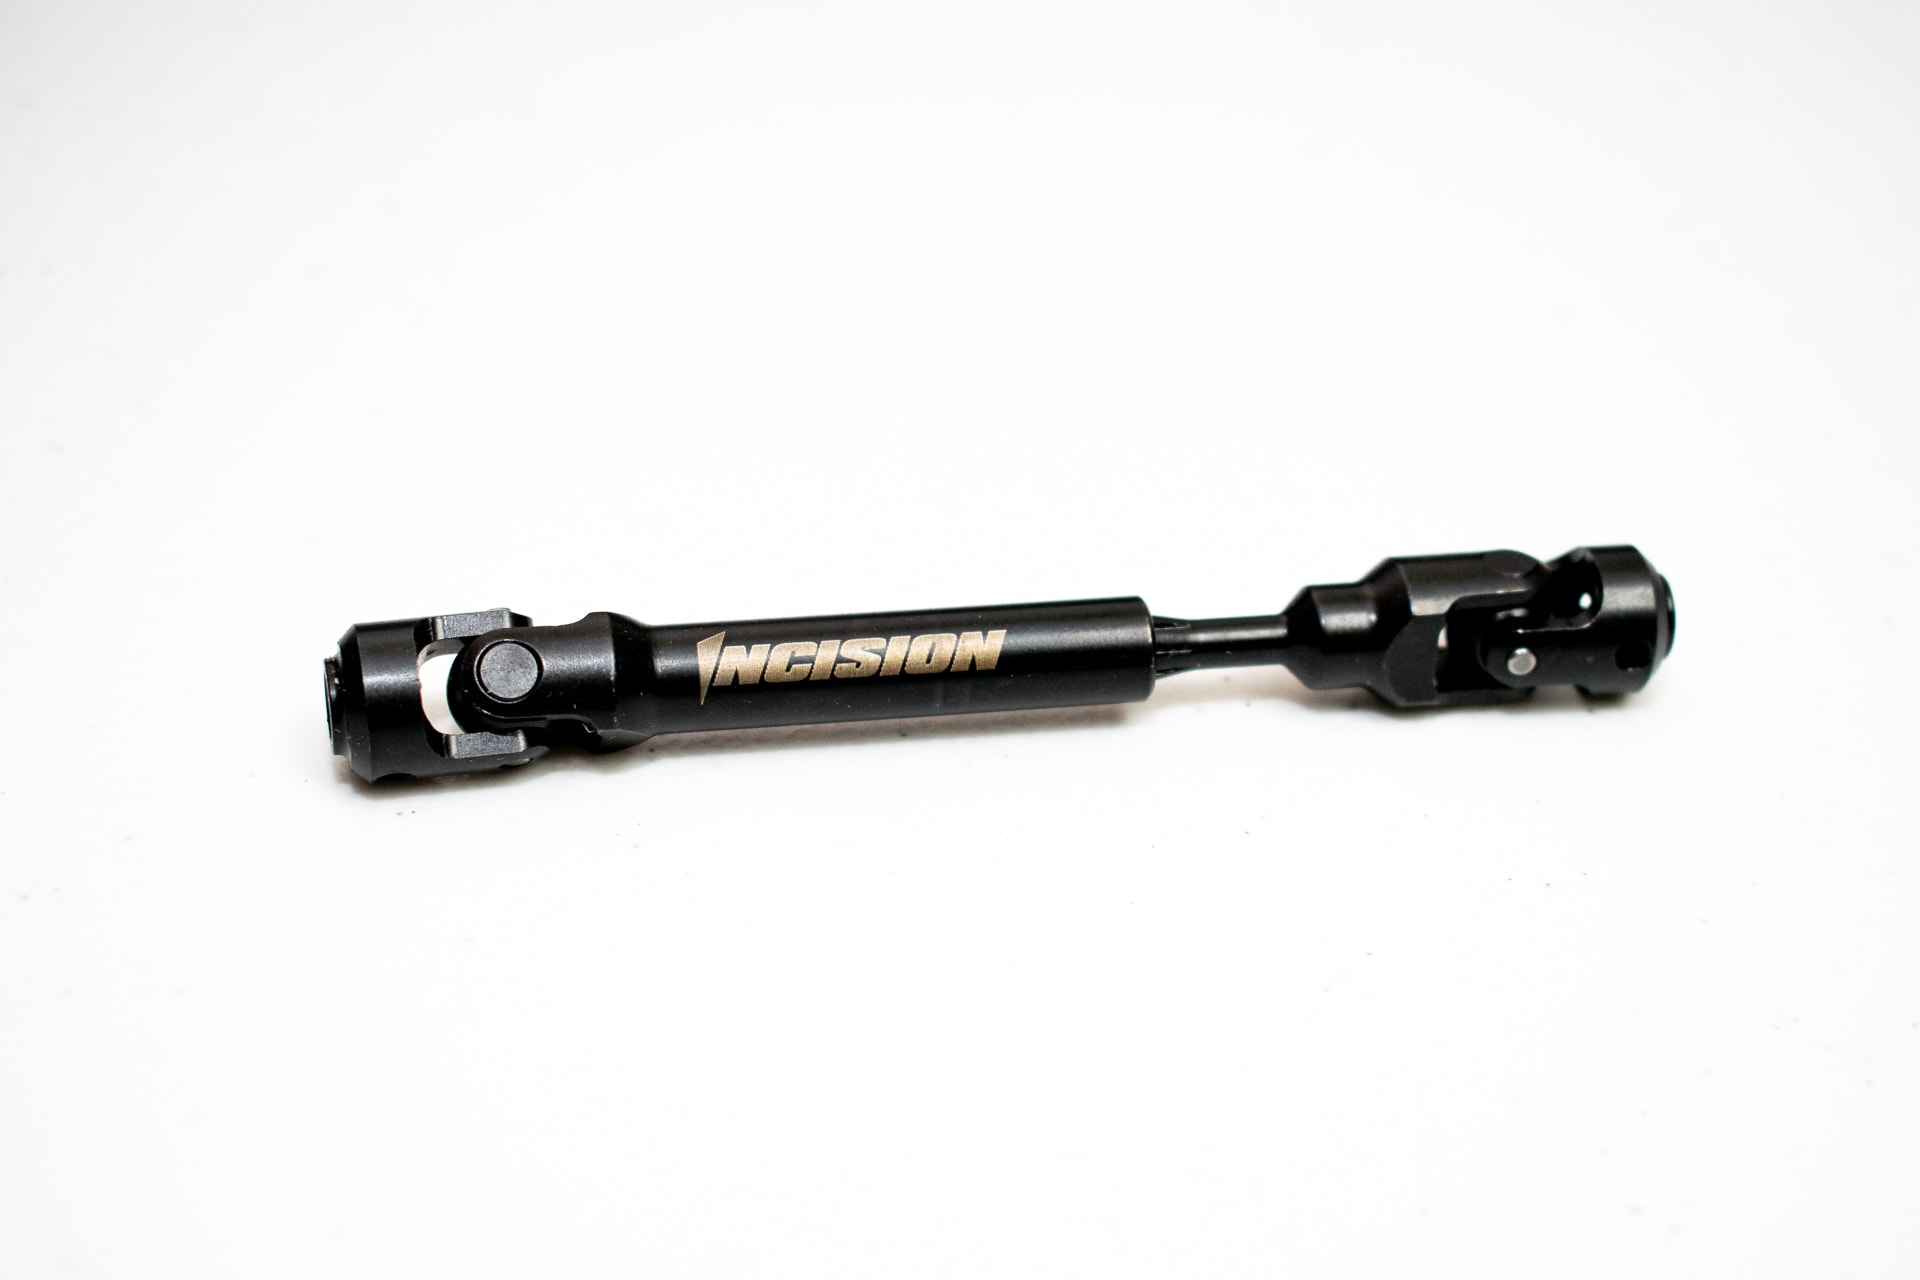 Incision Driveshafts for the Axial SCX10